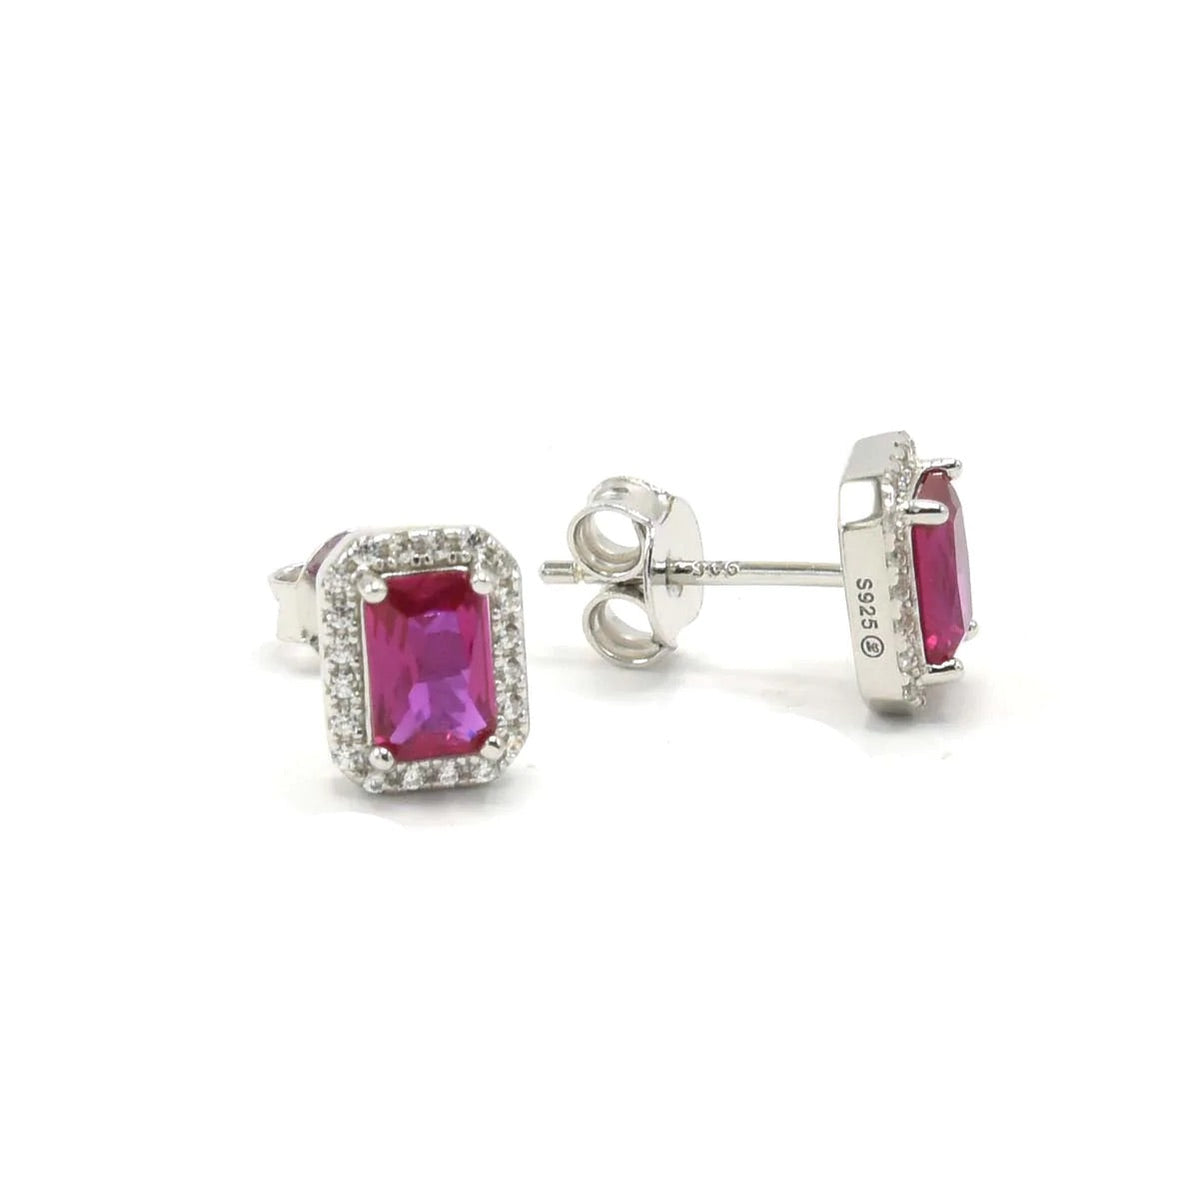 earrings, silver earrings, silver stud earrings, pink stud earrings, 925, hypoallergenic earrings, fashion jewelry, statement earrings, fine jewelry, gift ideas, pink jewelry, pink stud earrings rectangle waterproof haod diamond cz sterling silver .925 rectangle earrings pink everyday studs for sensitive ears hypoallergenic, waterproof gift ideas for men and woman best jewelry in the USA in Miami Brickell Kesley Boutique